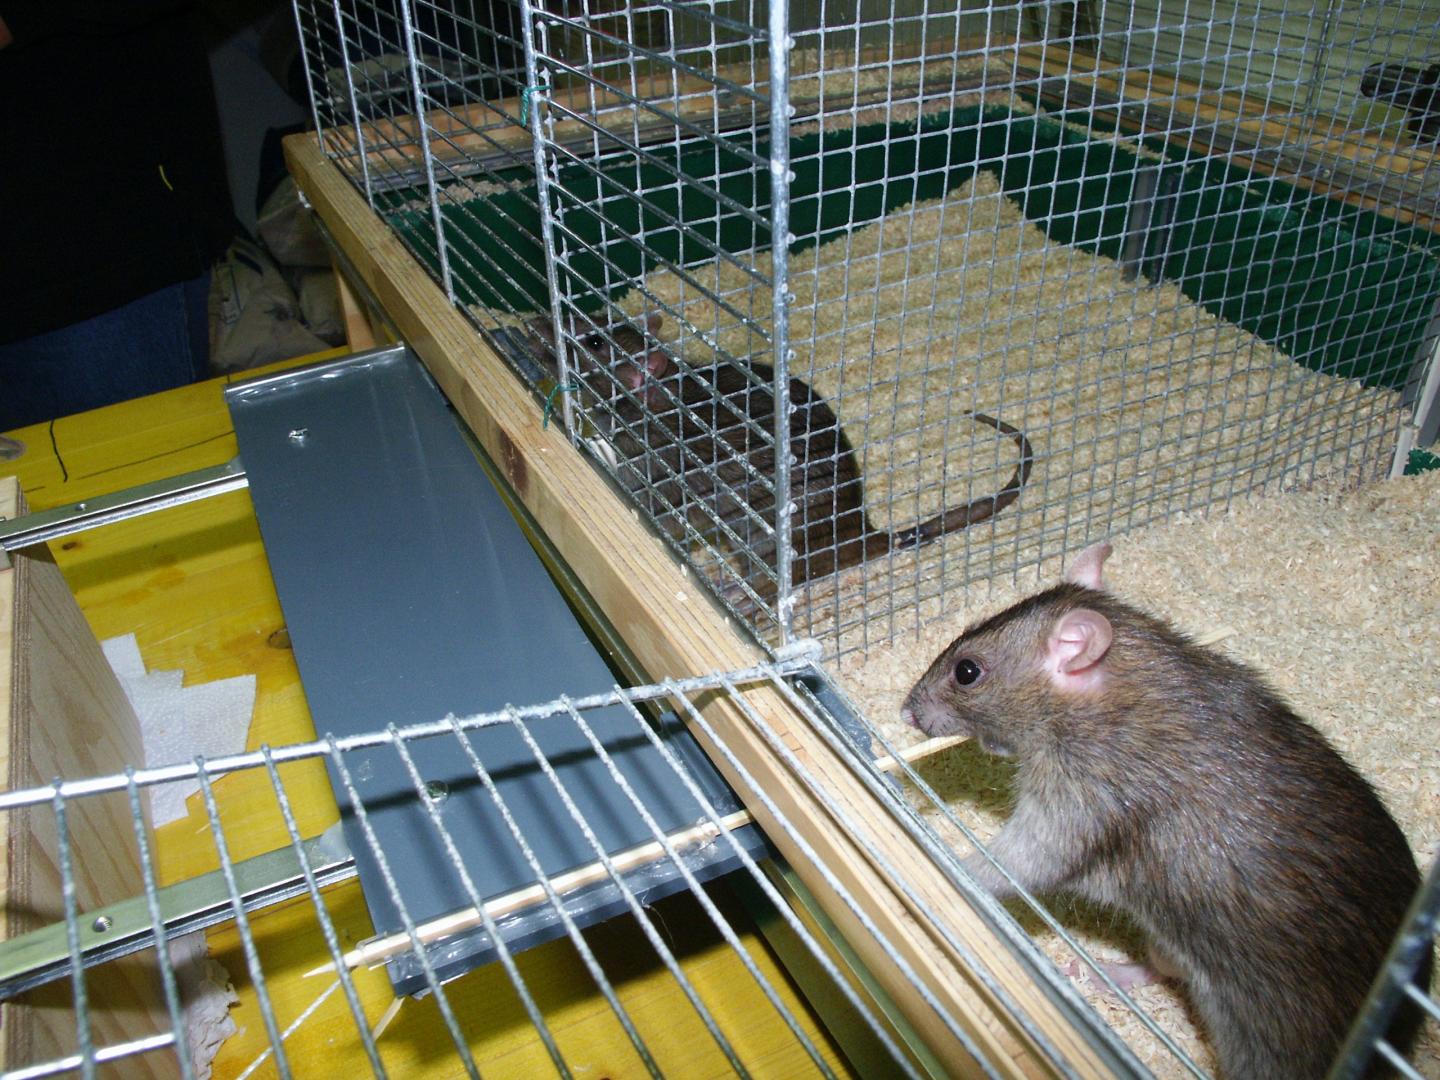 Two shiny rats in cages with dividing wall